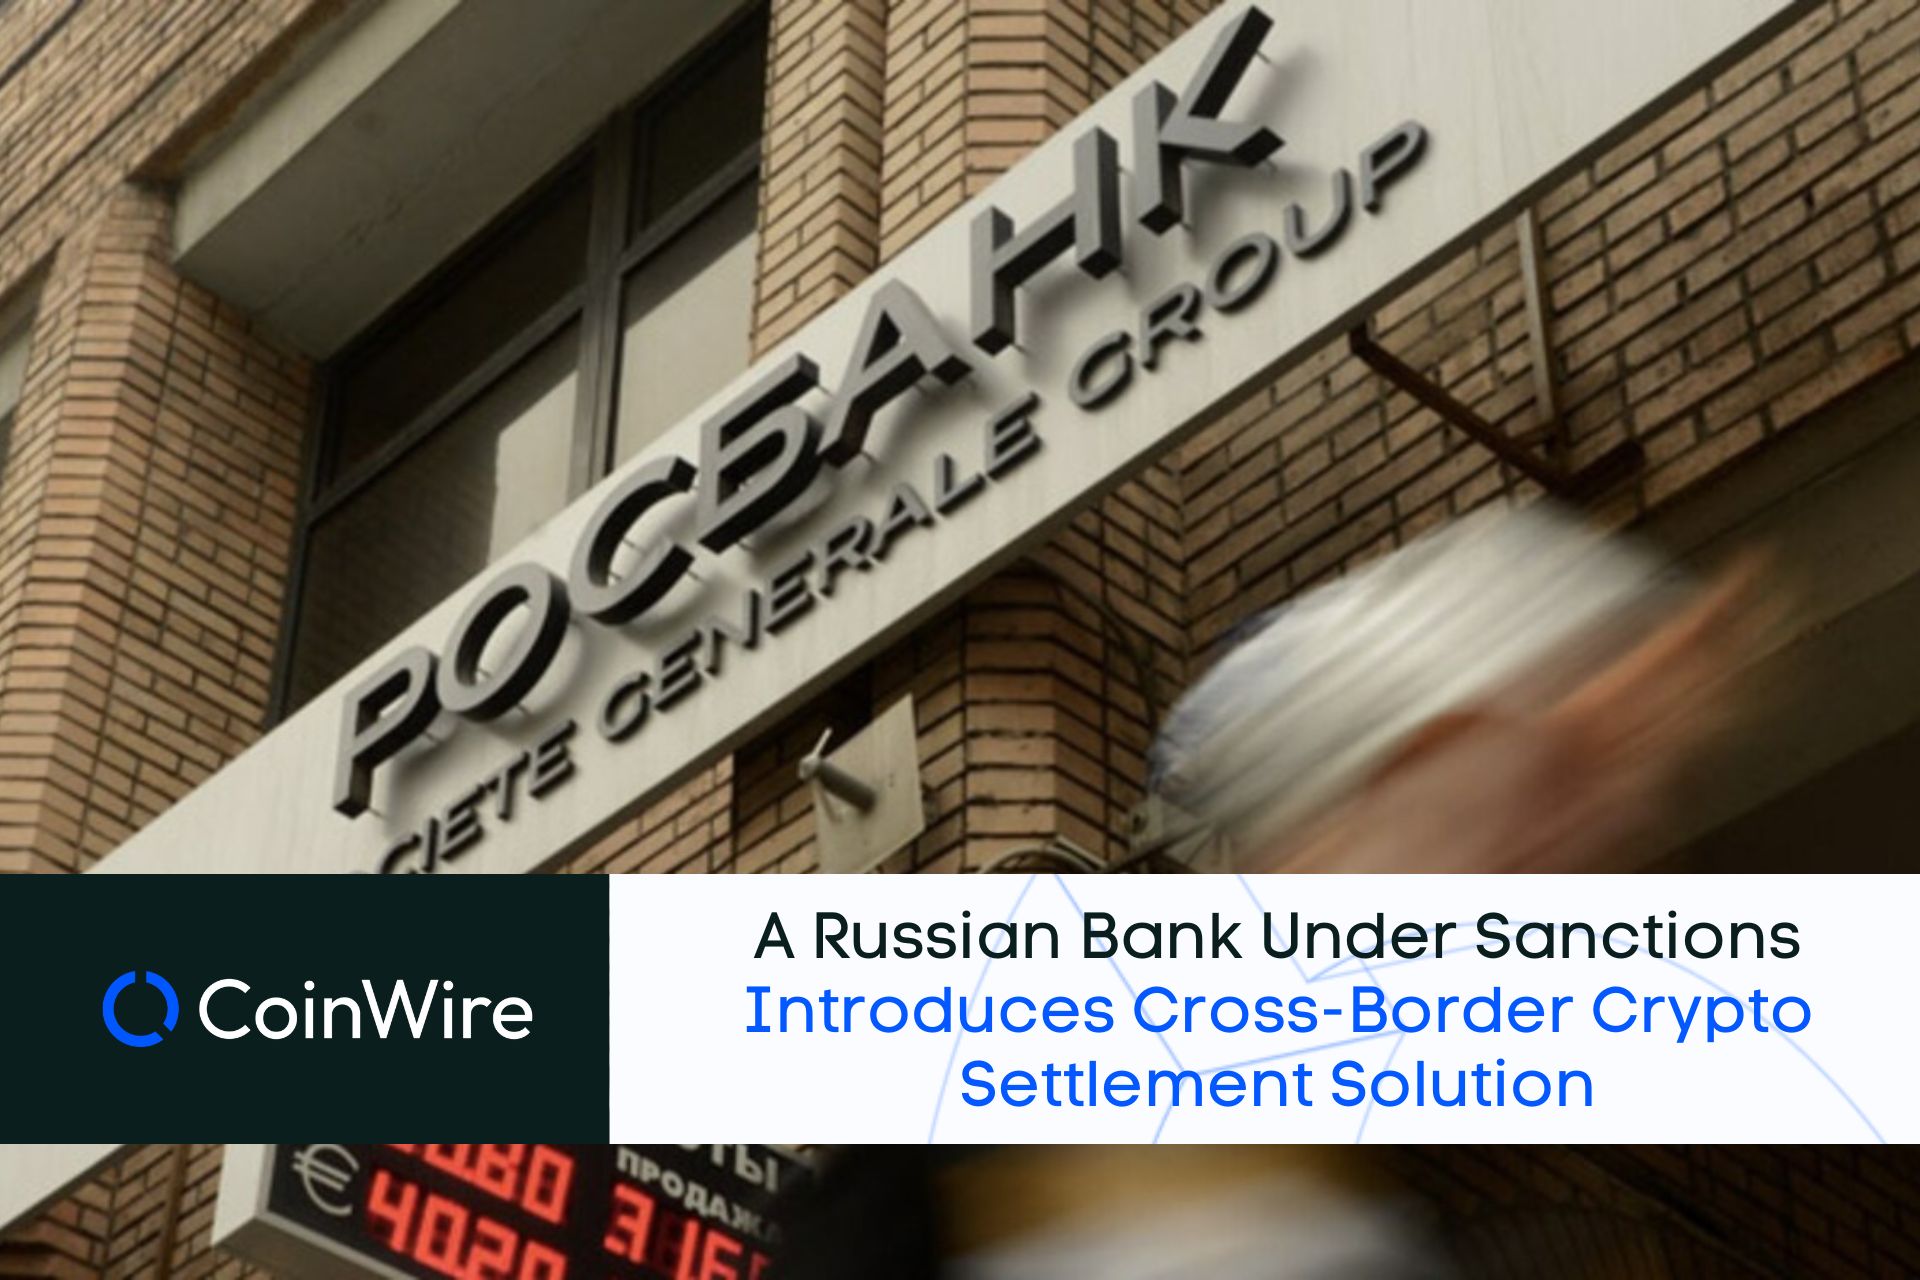 Rosbank Under Sanctions Introduces Cross-Border Crypto Settlement Solution